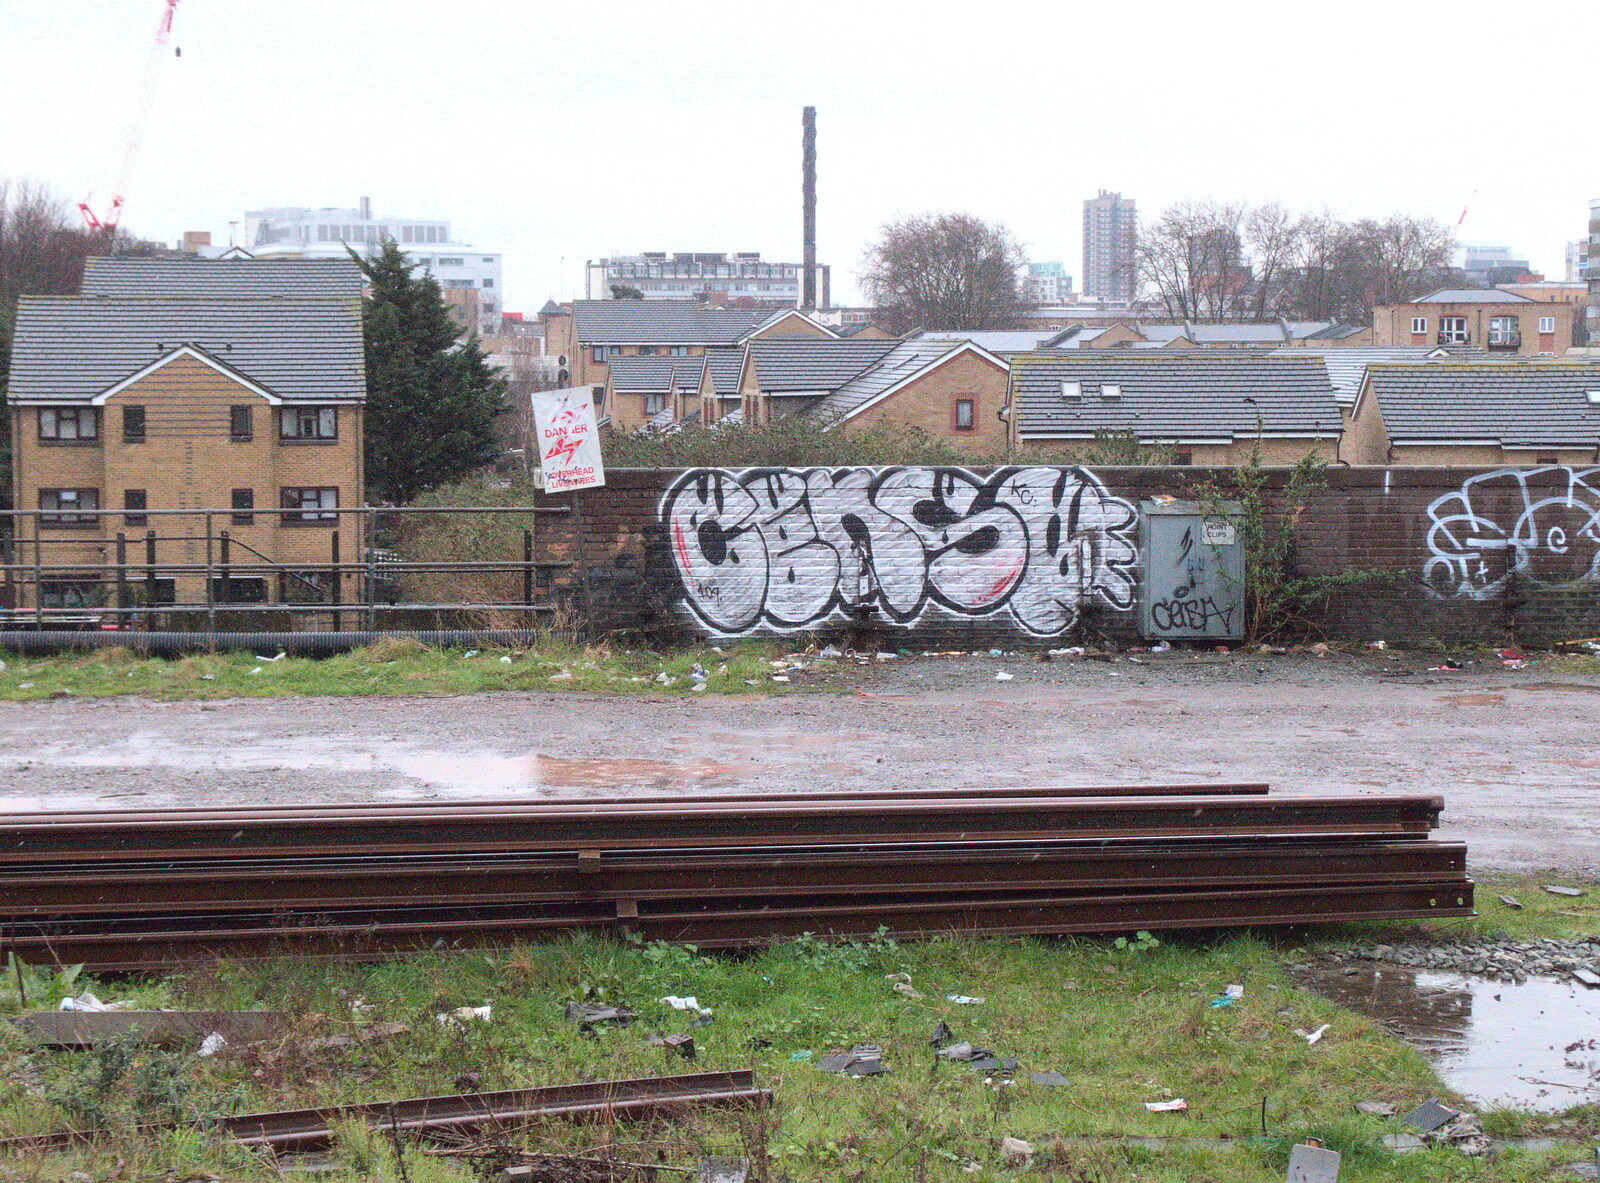 More trackside graffiti from Trackside Graffiti, and Harry's Cake, London and Suffolk - 28th March 2018